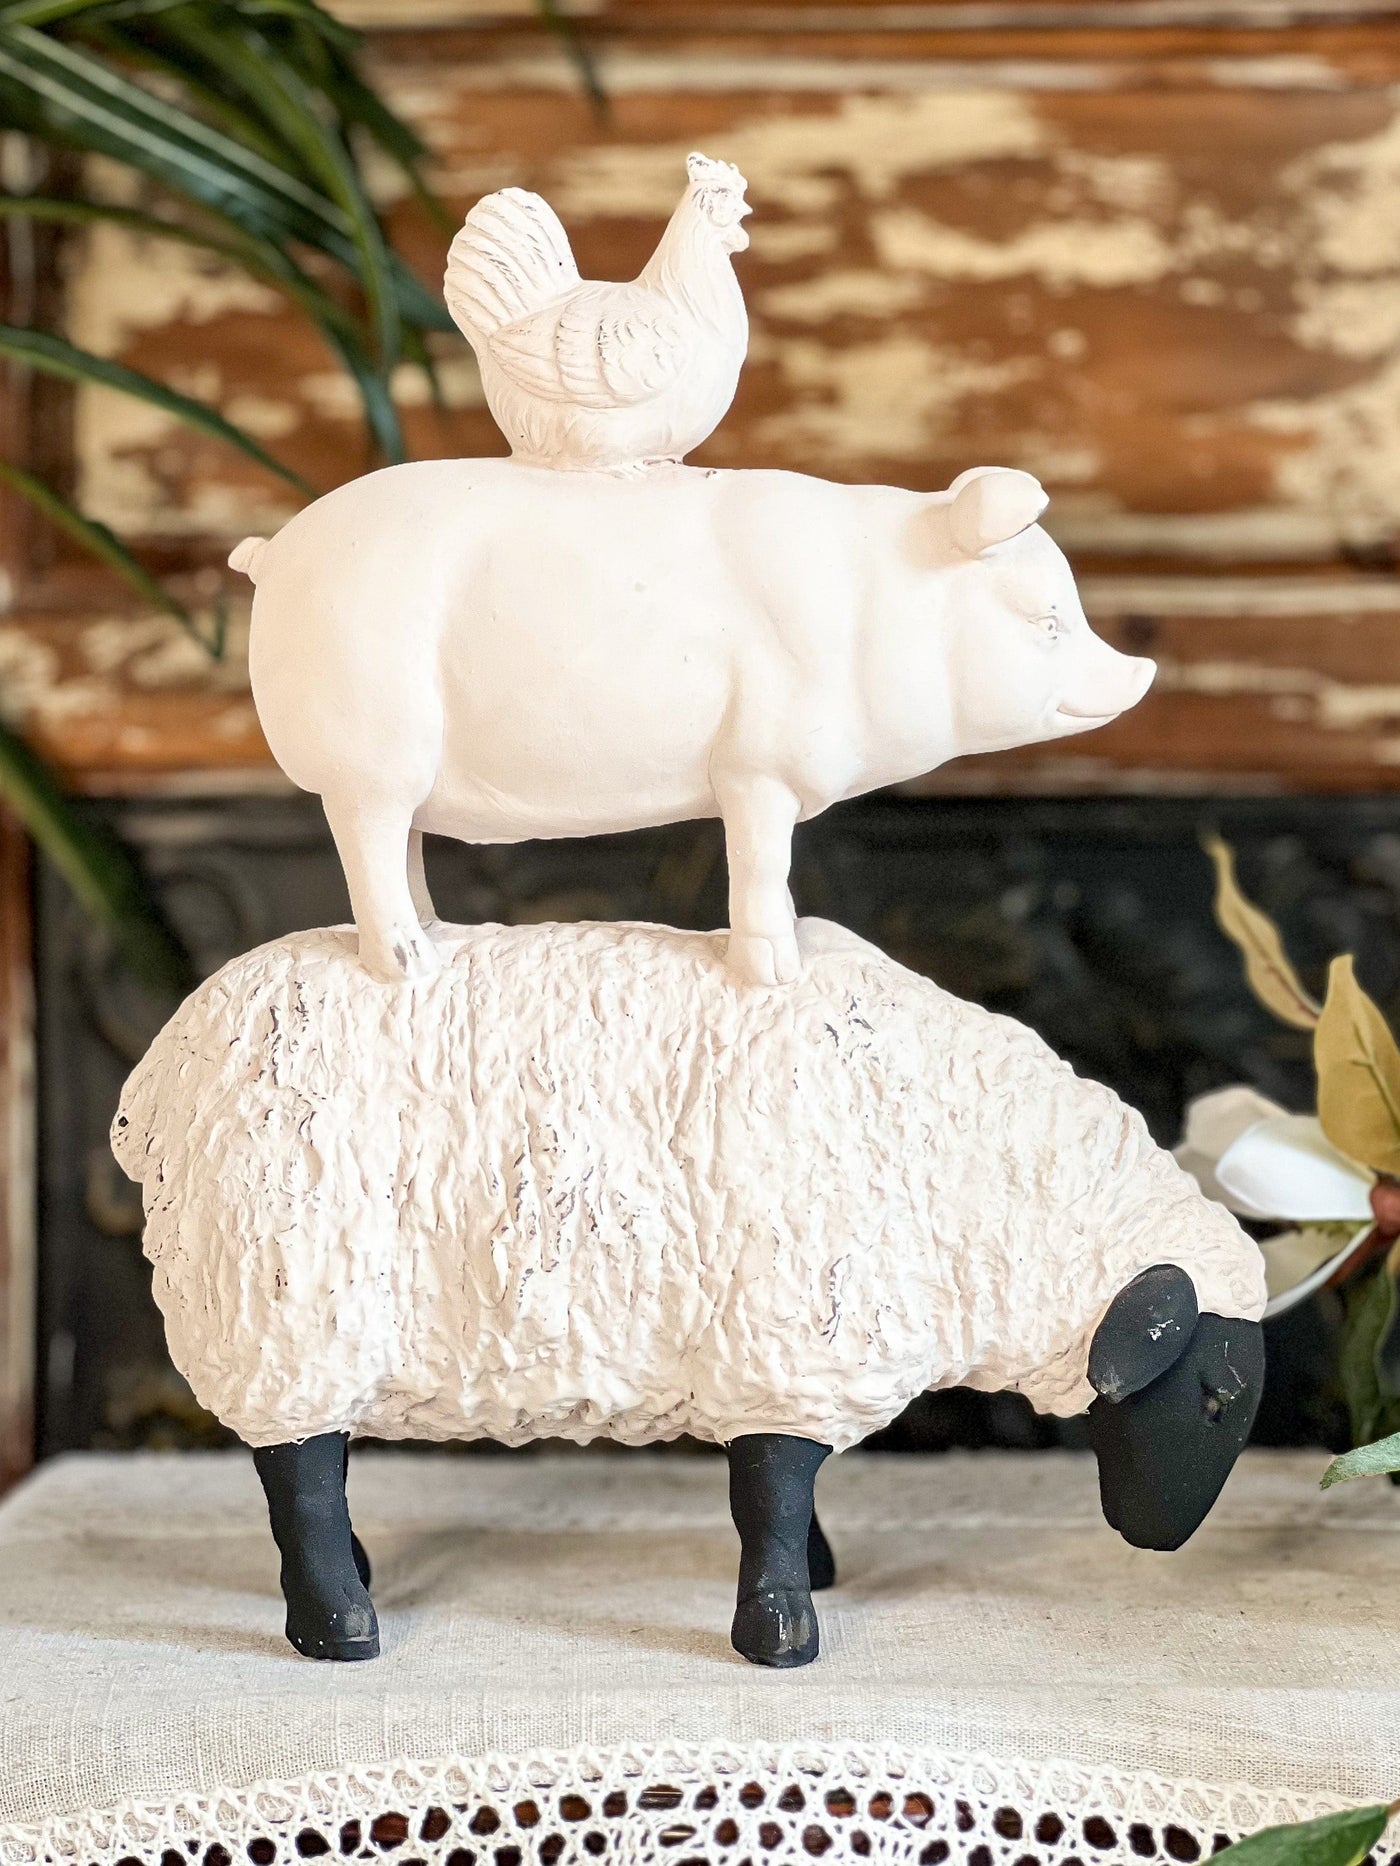 FARM ANIMAL STATUES Revive In Style Vintage Furniture Painted Refinished Redesign Beautiful One of a Kind Artistic Antique Unique Home Decor Interior Design French Country Shabby Chic Cottage Farmhouse Grandmillenial Coastal Chalk Paint Metallic Glam Eclectic Quality Dovetailed Rustic Furniture Painter Pinterest Bedroom Living Room Entryway Kitchen Home Trends House Styles Decorating ideas